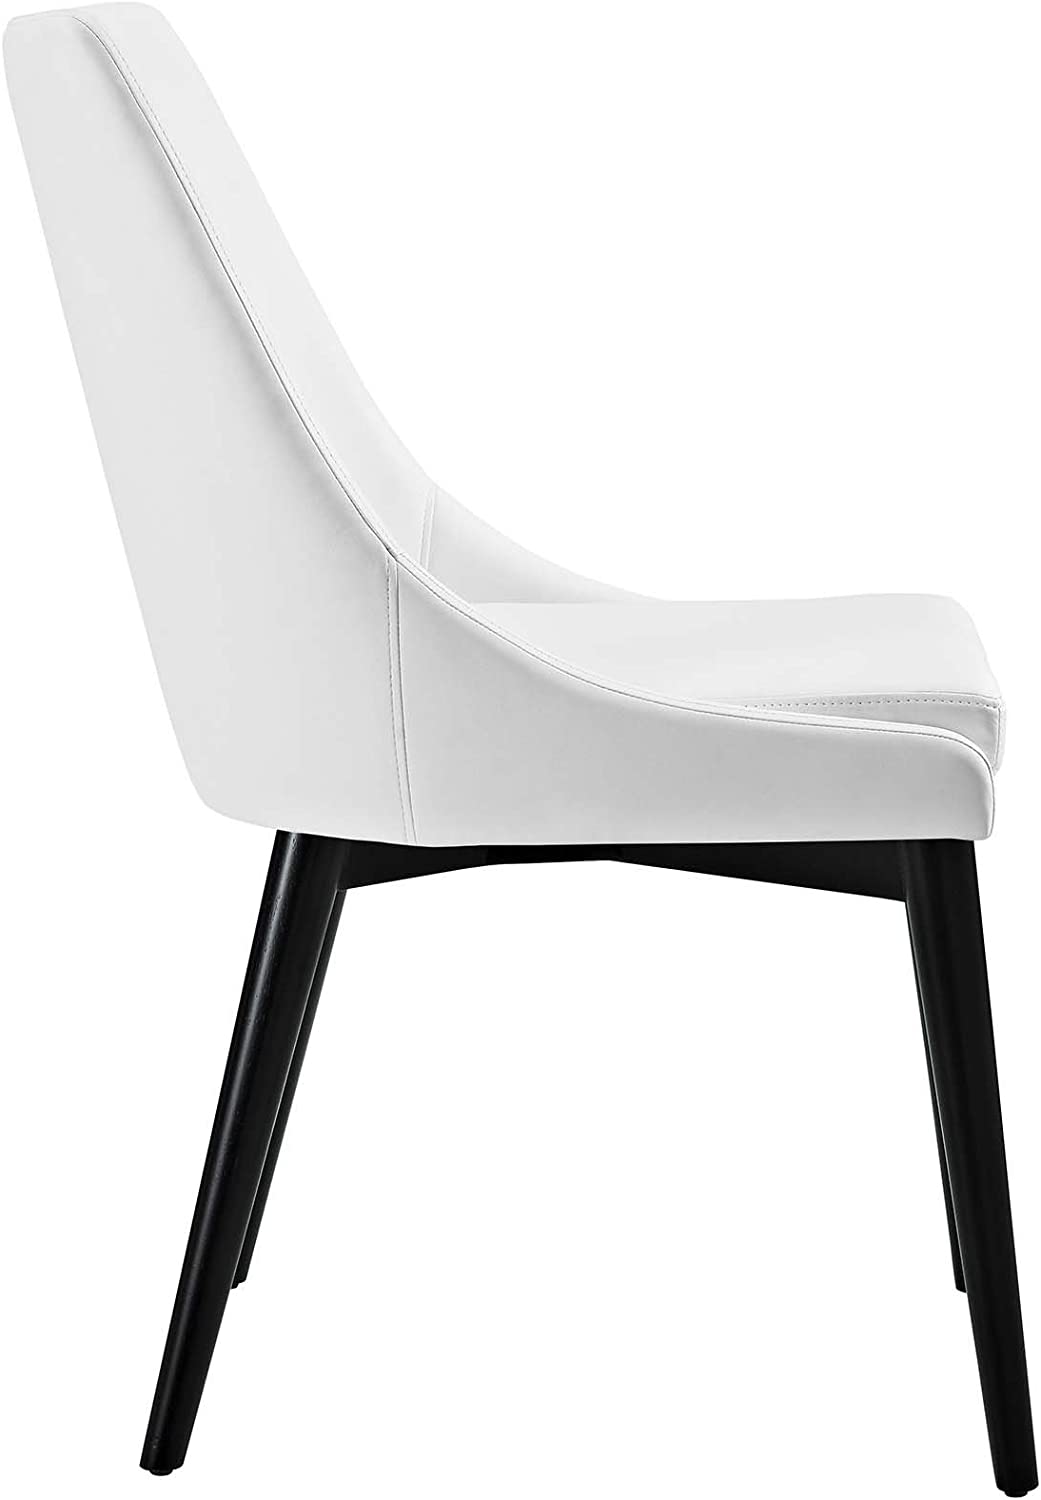 Modway Viscount Mid-Century Modern Faux Leather Upholstered Kitchen and Dining Room Chair in White